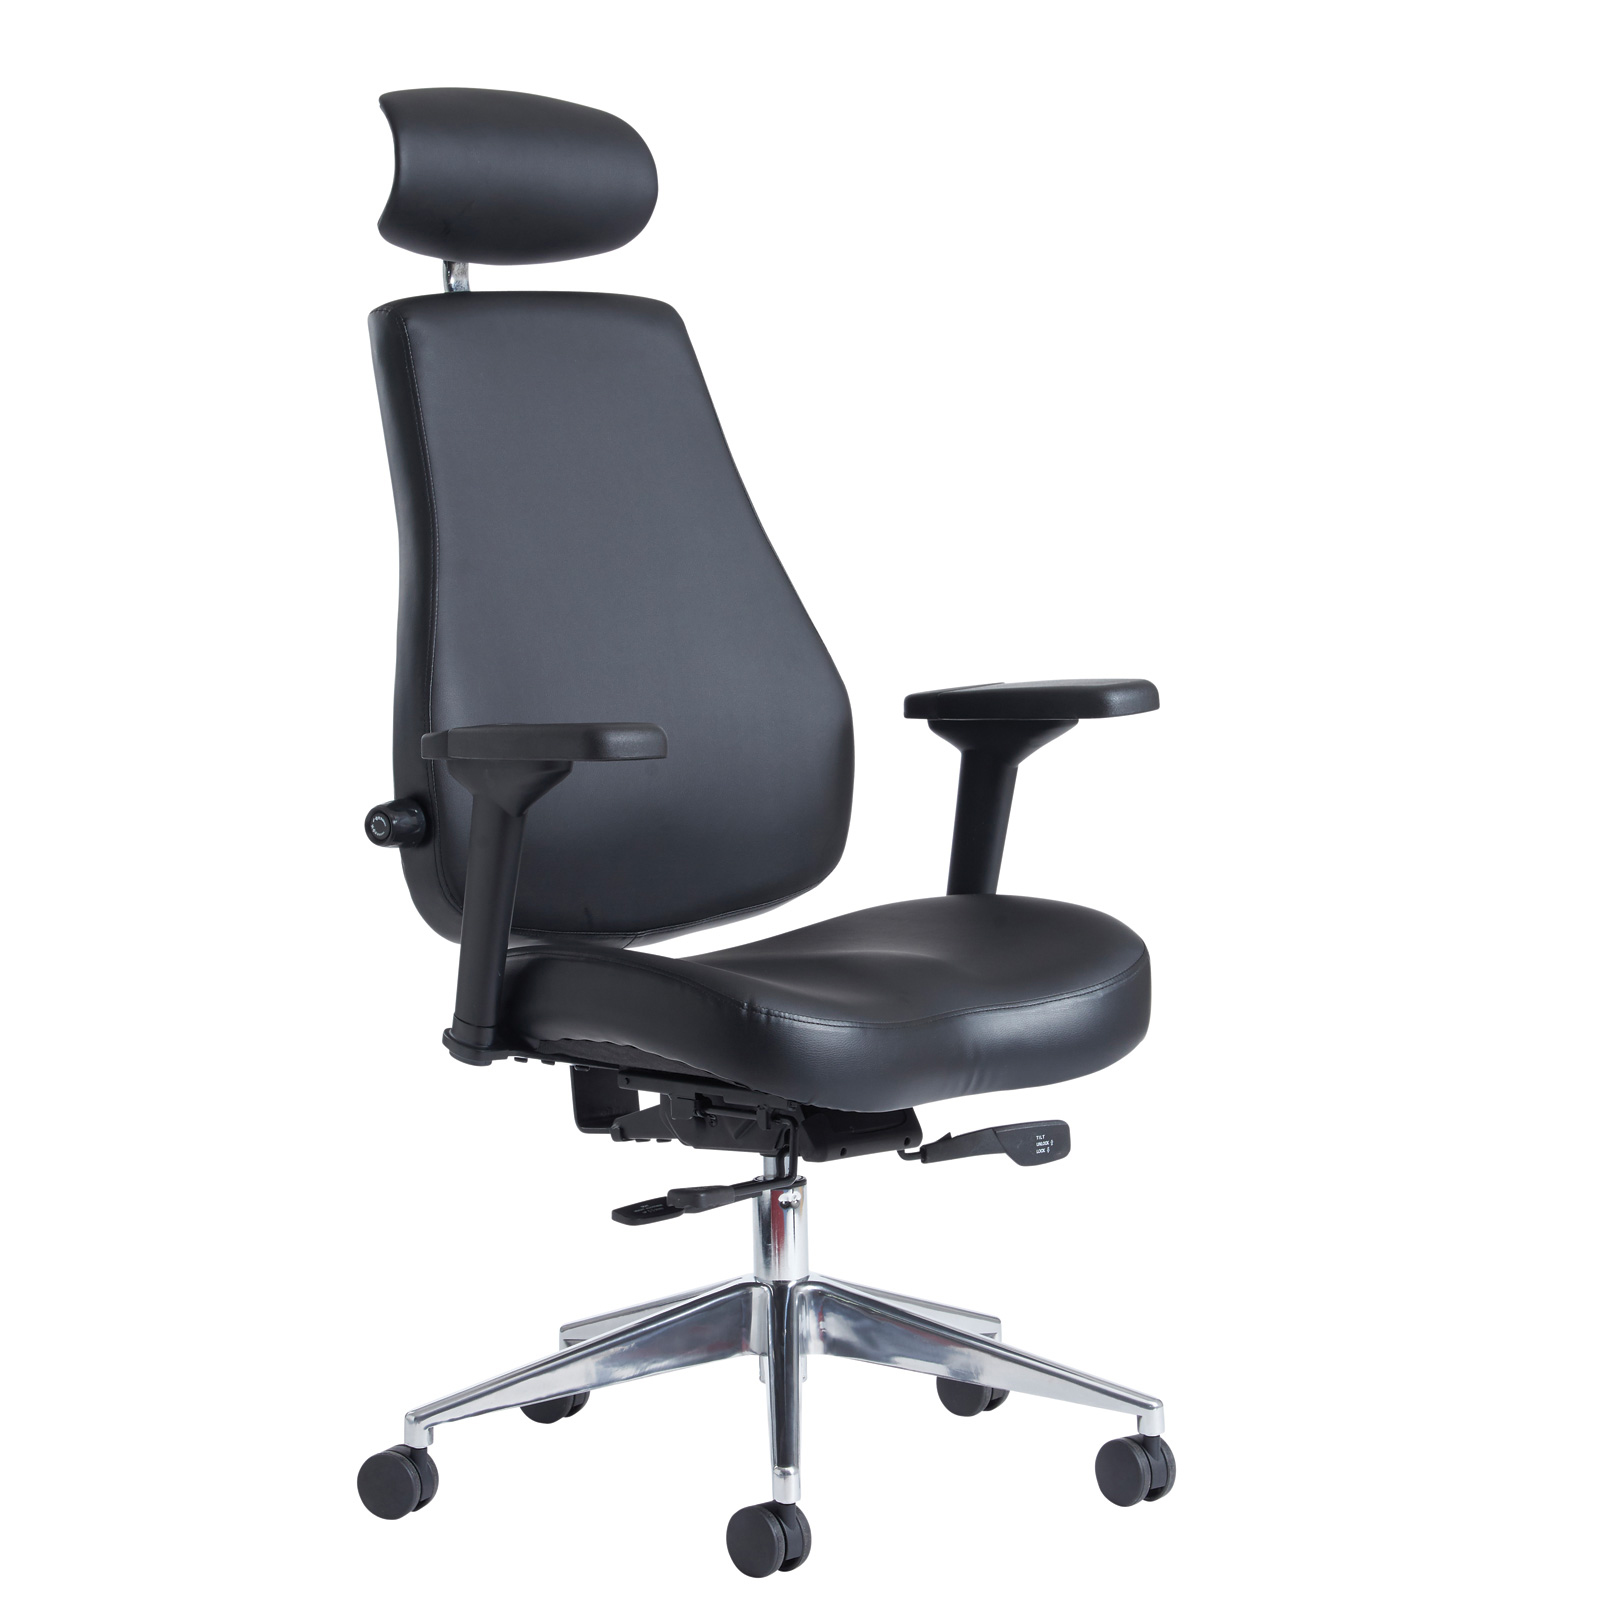 Franklin high back 24 hour task chair - black faux leather